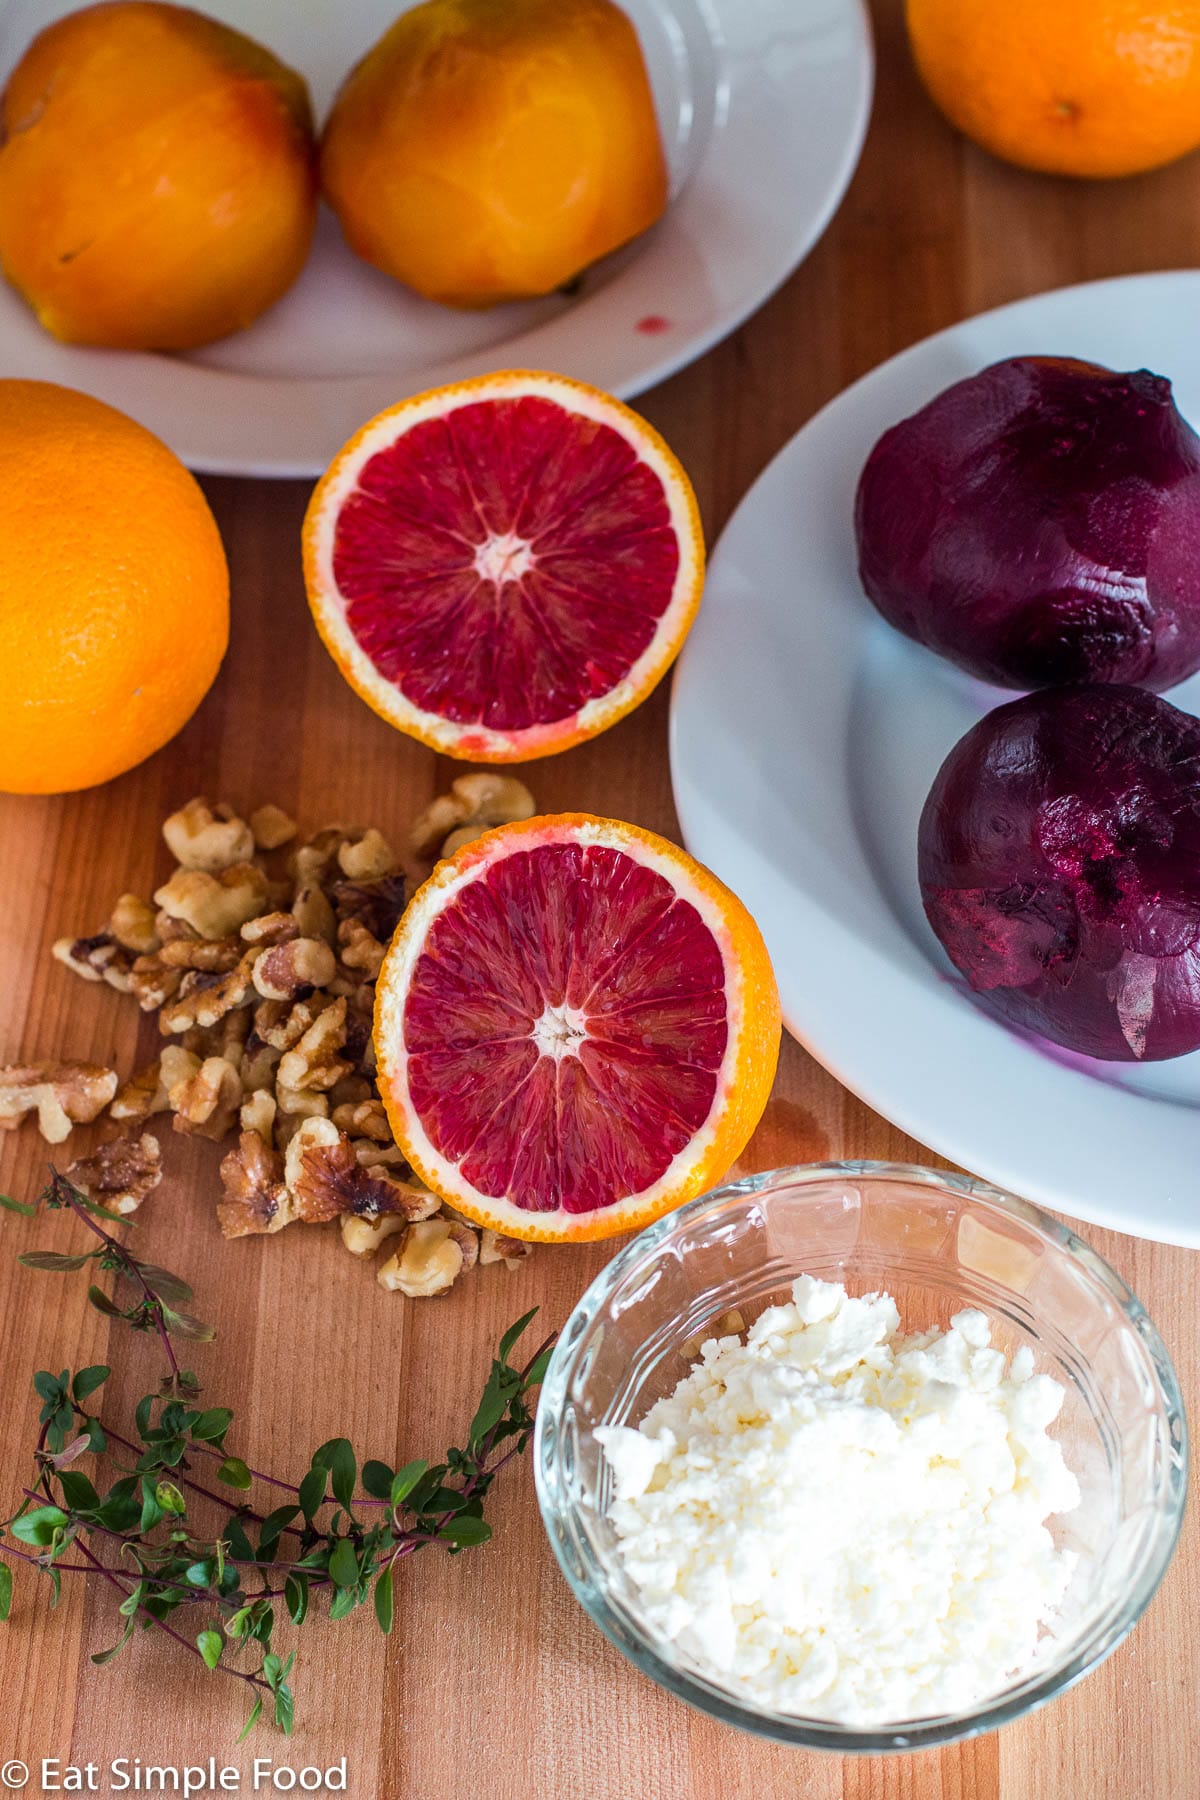 Ingredients on a wood cutting board: cooked whole red beets, cooked whole yellow beets, whole oranges, walnut pieces, small cup of goat cheese crumbles, and sprigs of thyme.